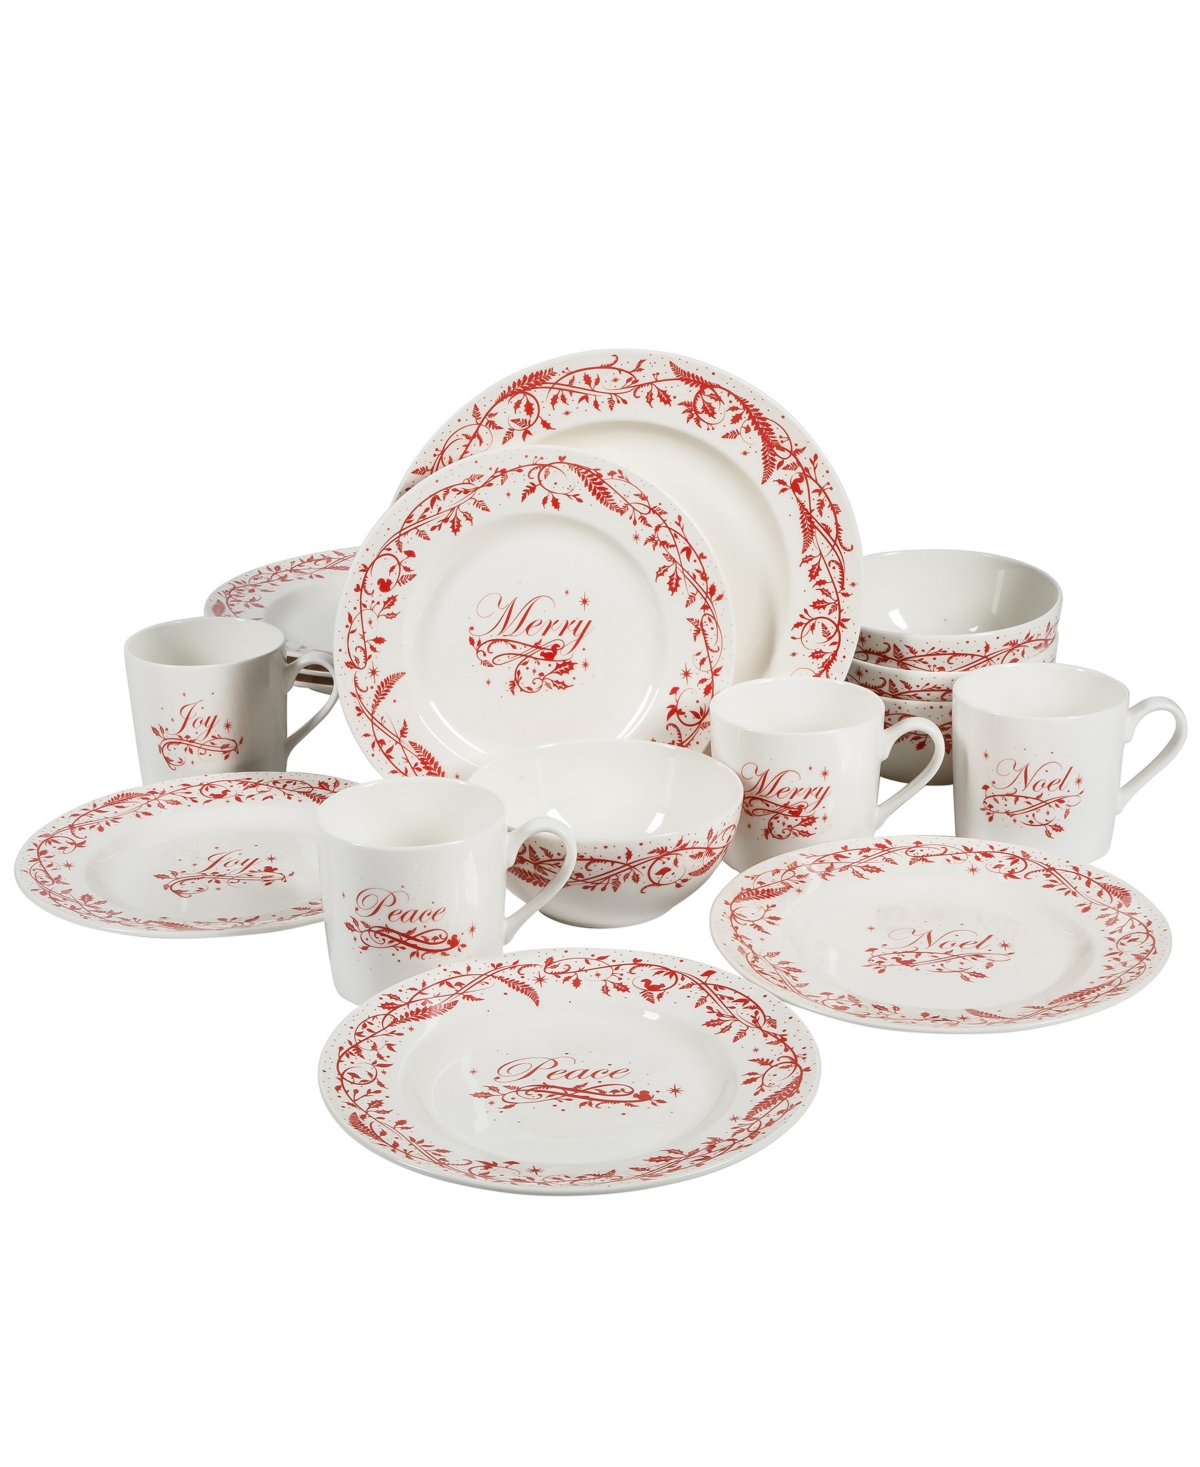 Holiday Vines 16 Piece Dinnerware Set, Service for 4 - White